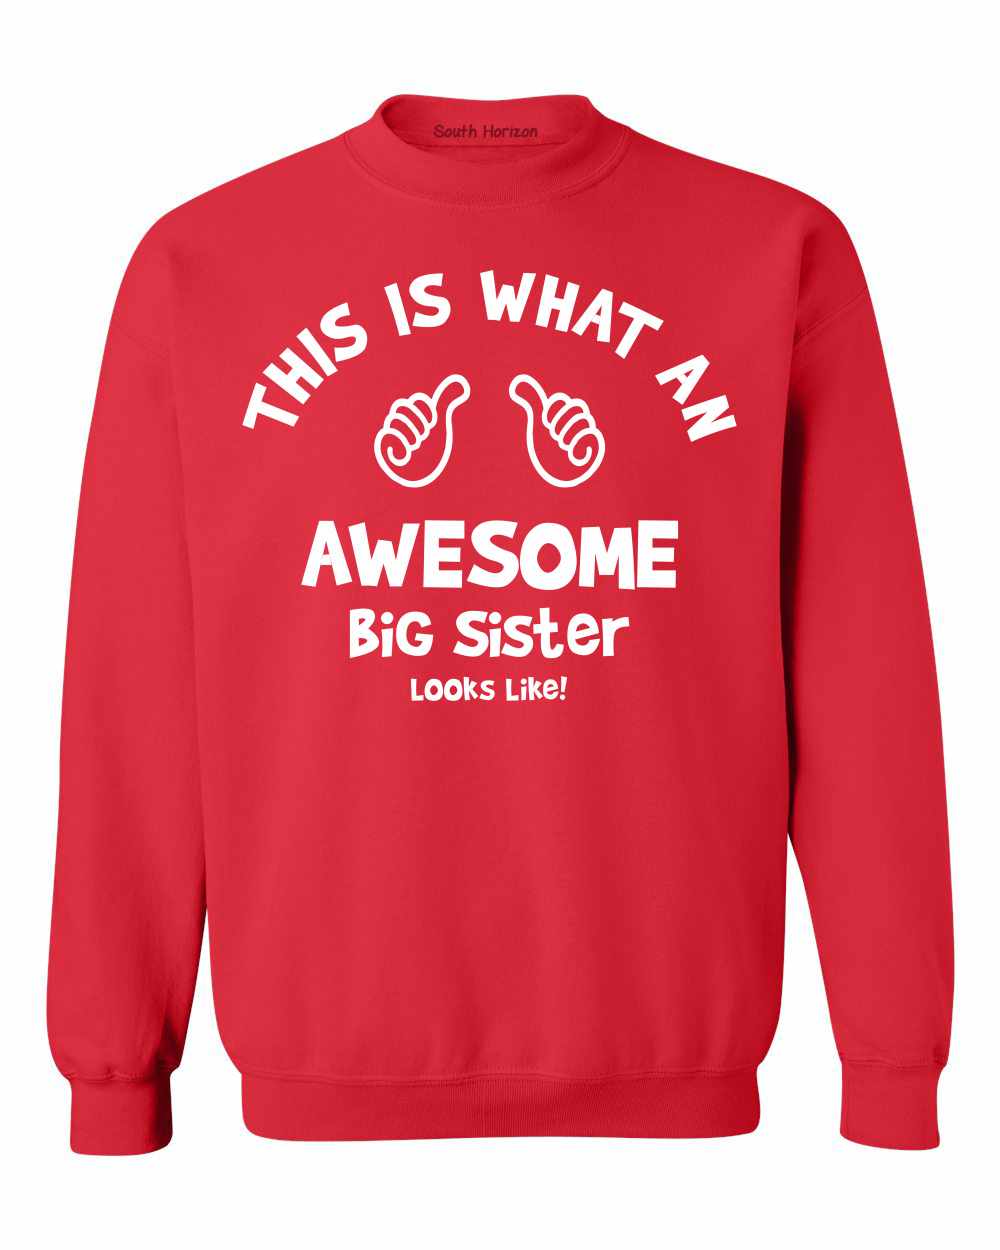 This is What an AWESOME BIG SISTER Looks Like Sweat Shirt